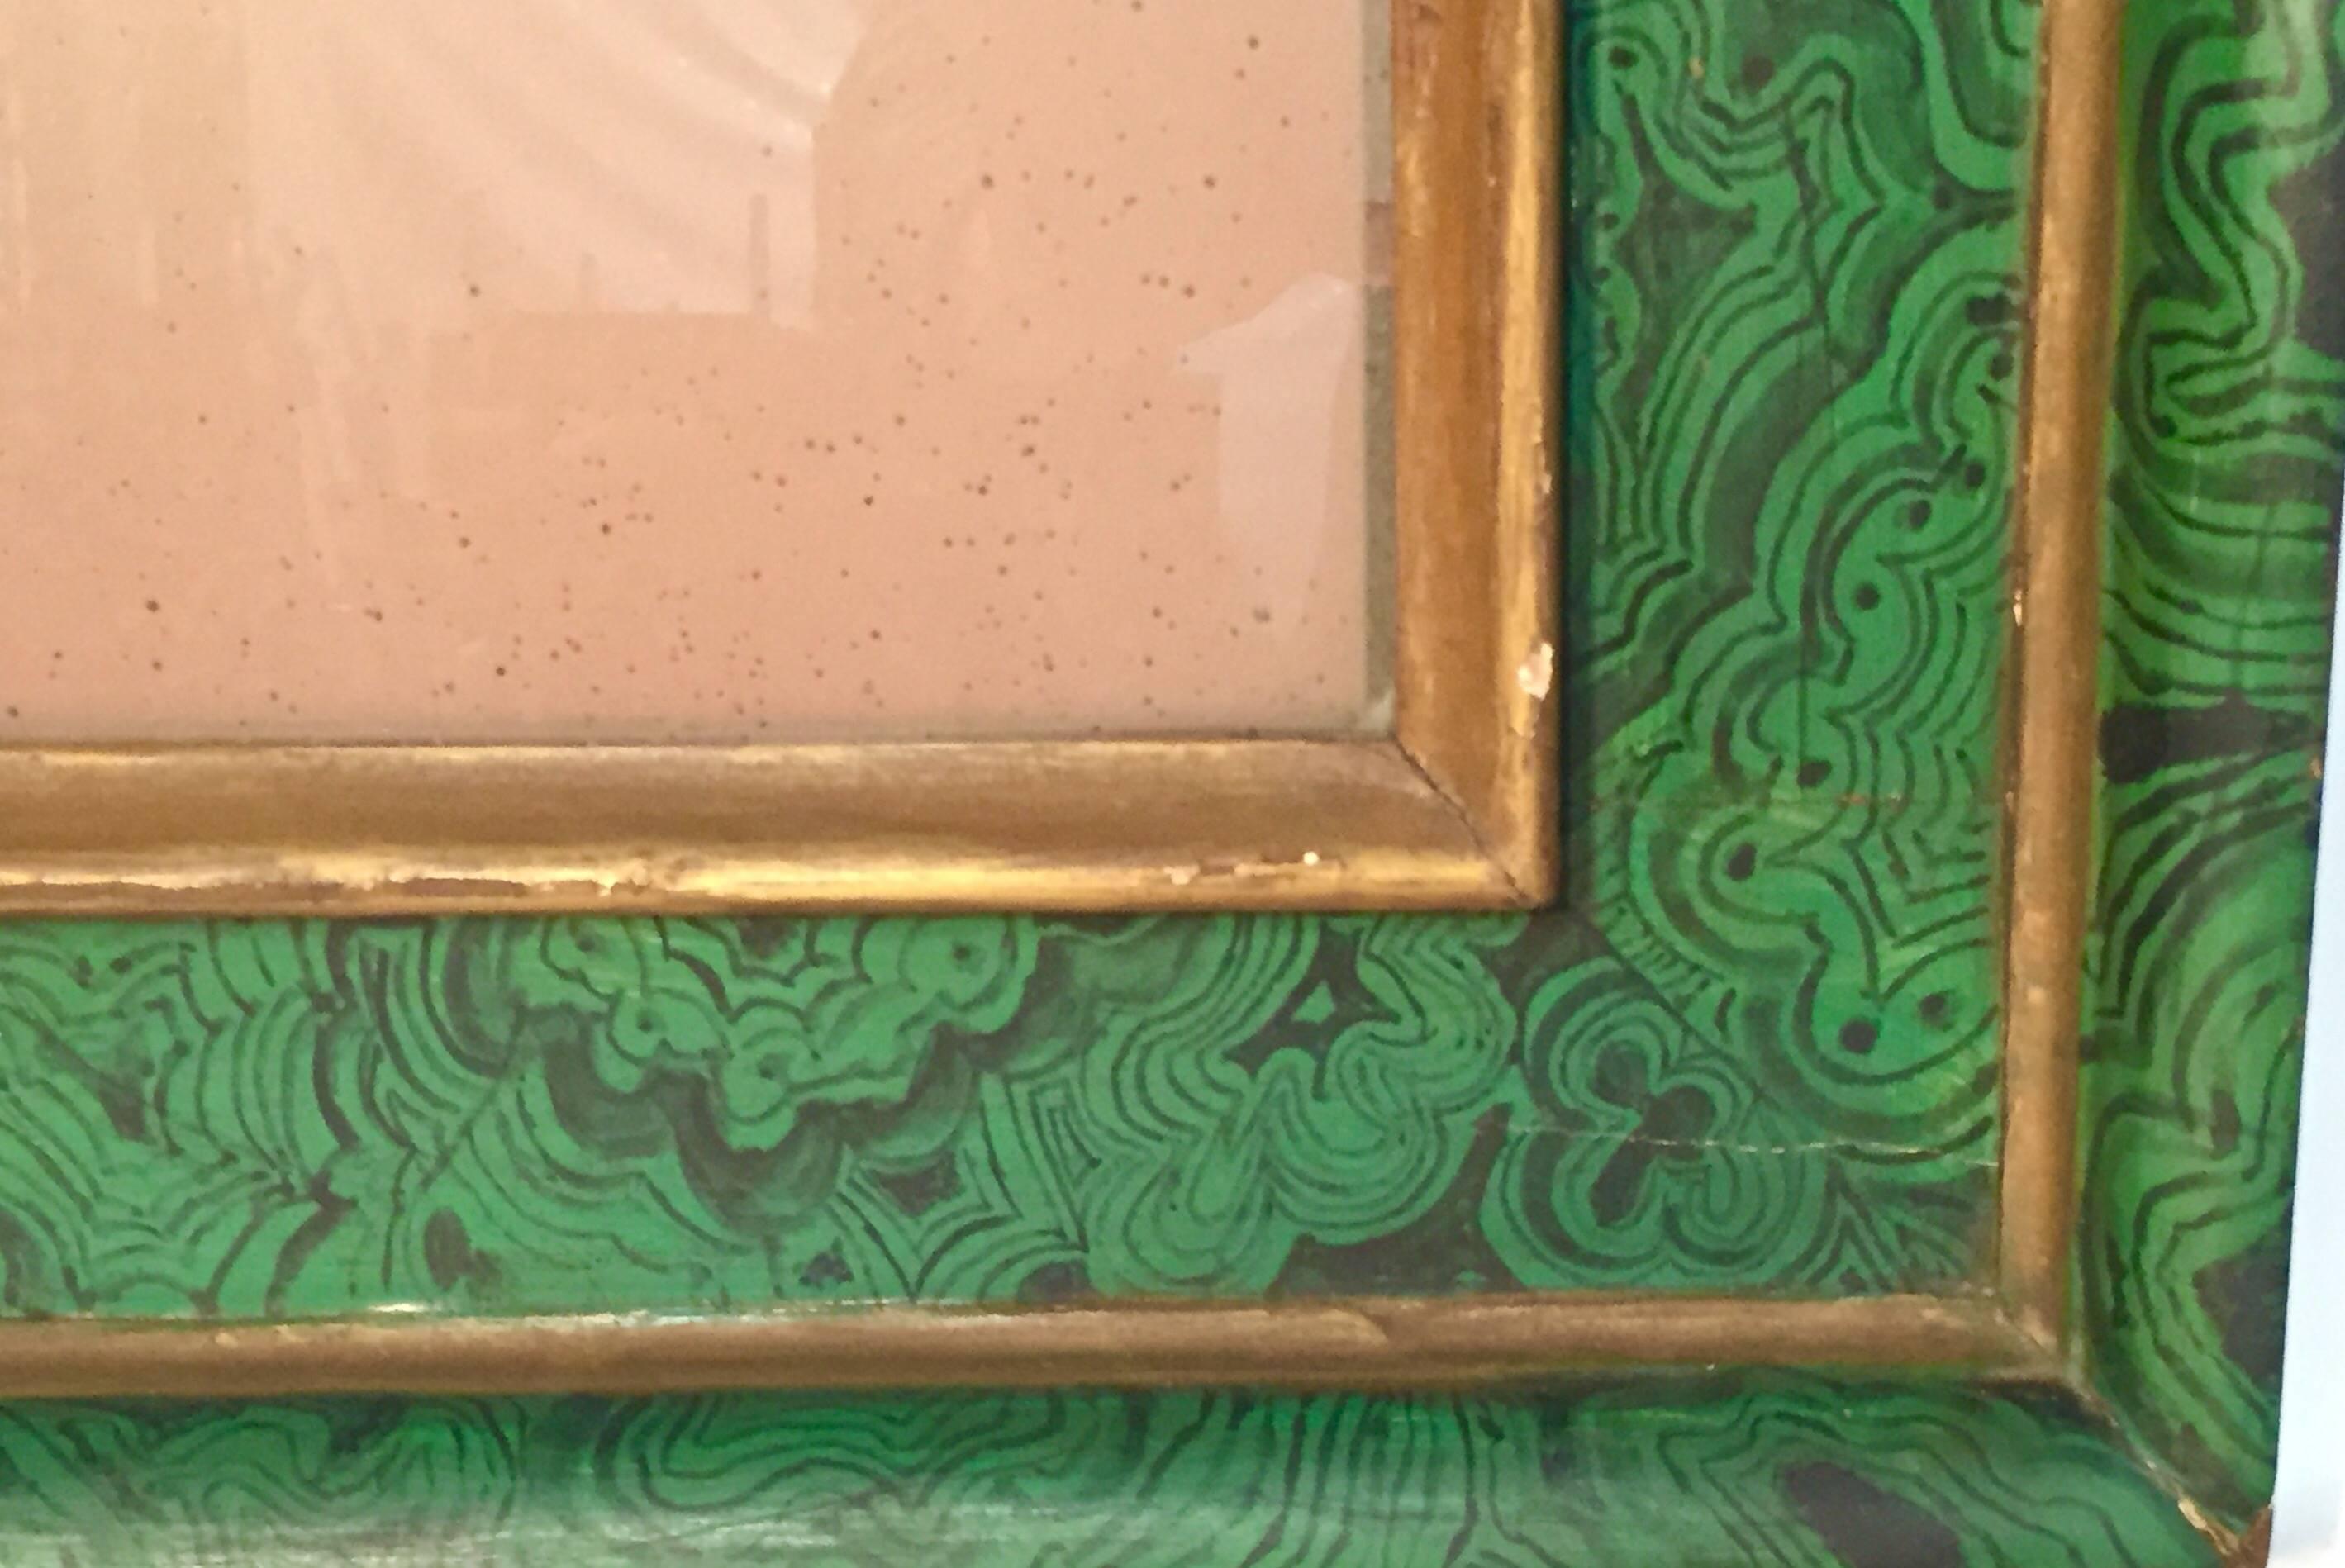 1930s hand-painted trompe d'oile malachite and gilt mirror from IMM, Florence.